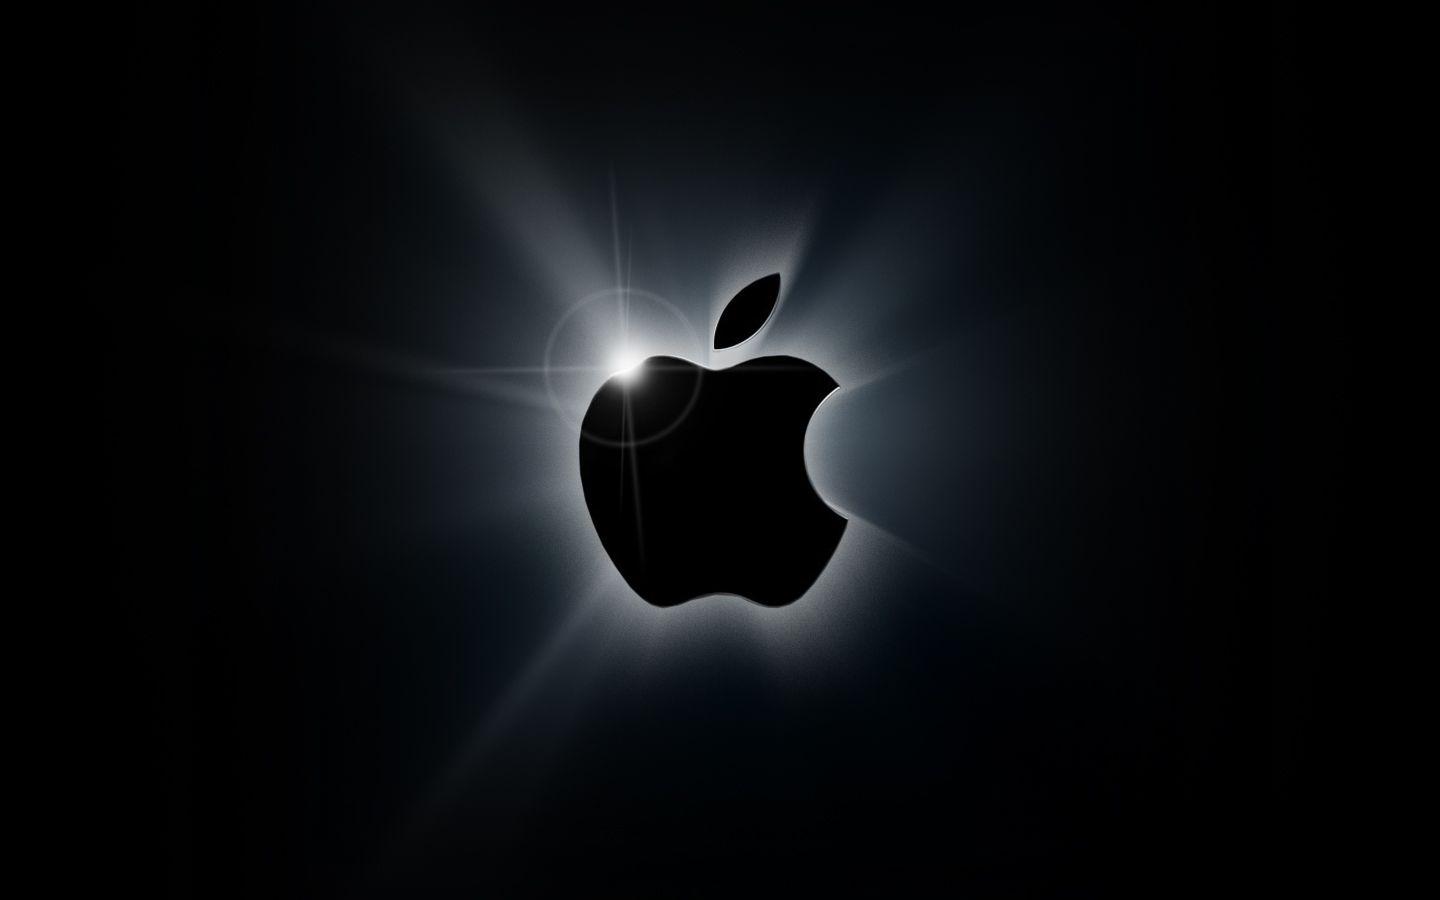 Black and Red Apple Logo - Apple: Brand, Cult, or Religion? of Media, Religion